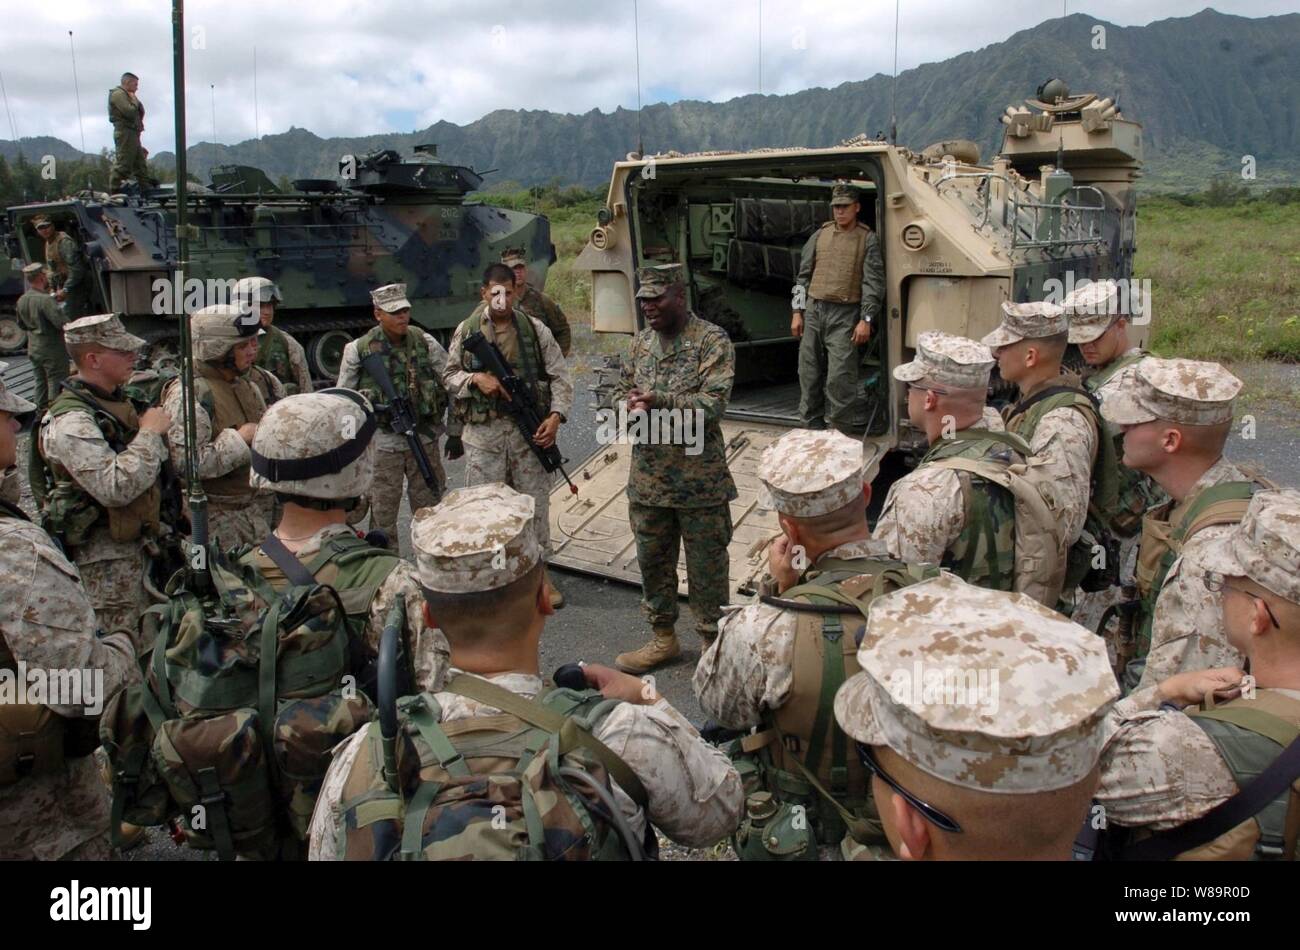 Marine Capt. Benjamin Venning (center) talks to his Marines after they finished training with their amphibious assault vehicles in Kauai, Hawaii, on June 27, 2005.  The Marines from the 3rd Amphibious Assault Battalion are conducting amphibious training on the beaches of the Pacific Missile Range Facility on Kauai. Venning is the 3rd Amphibious Assault Battalion company commander. Stock Photo